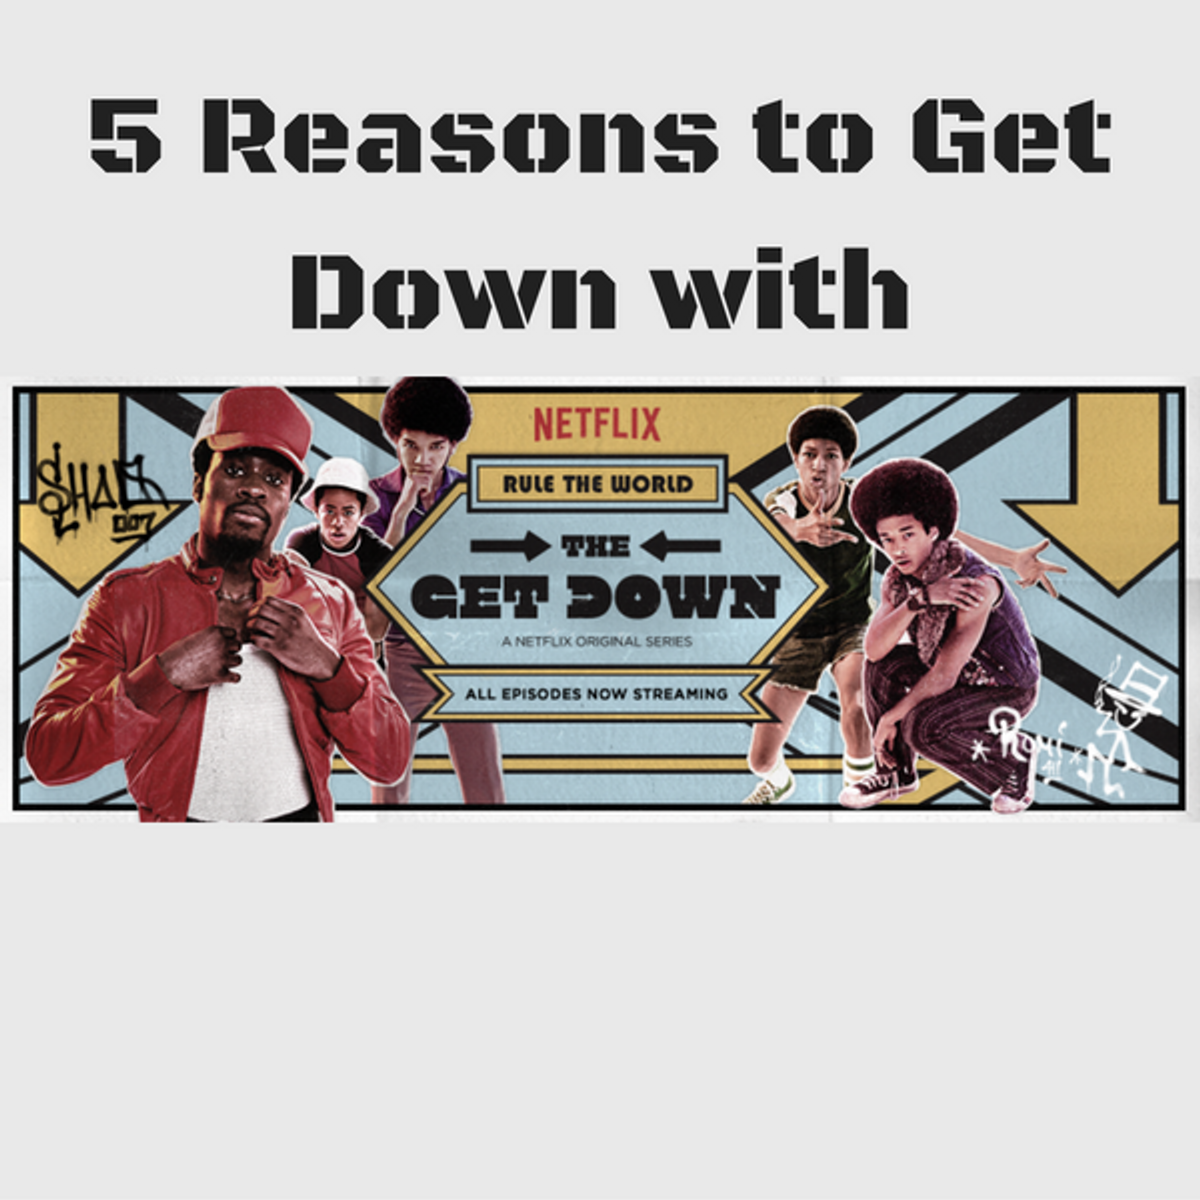 5 Reasons to Get Down with "The Get Down"